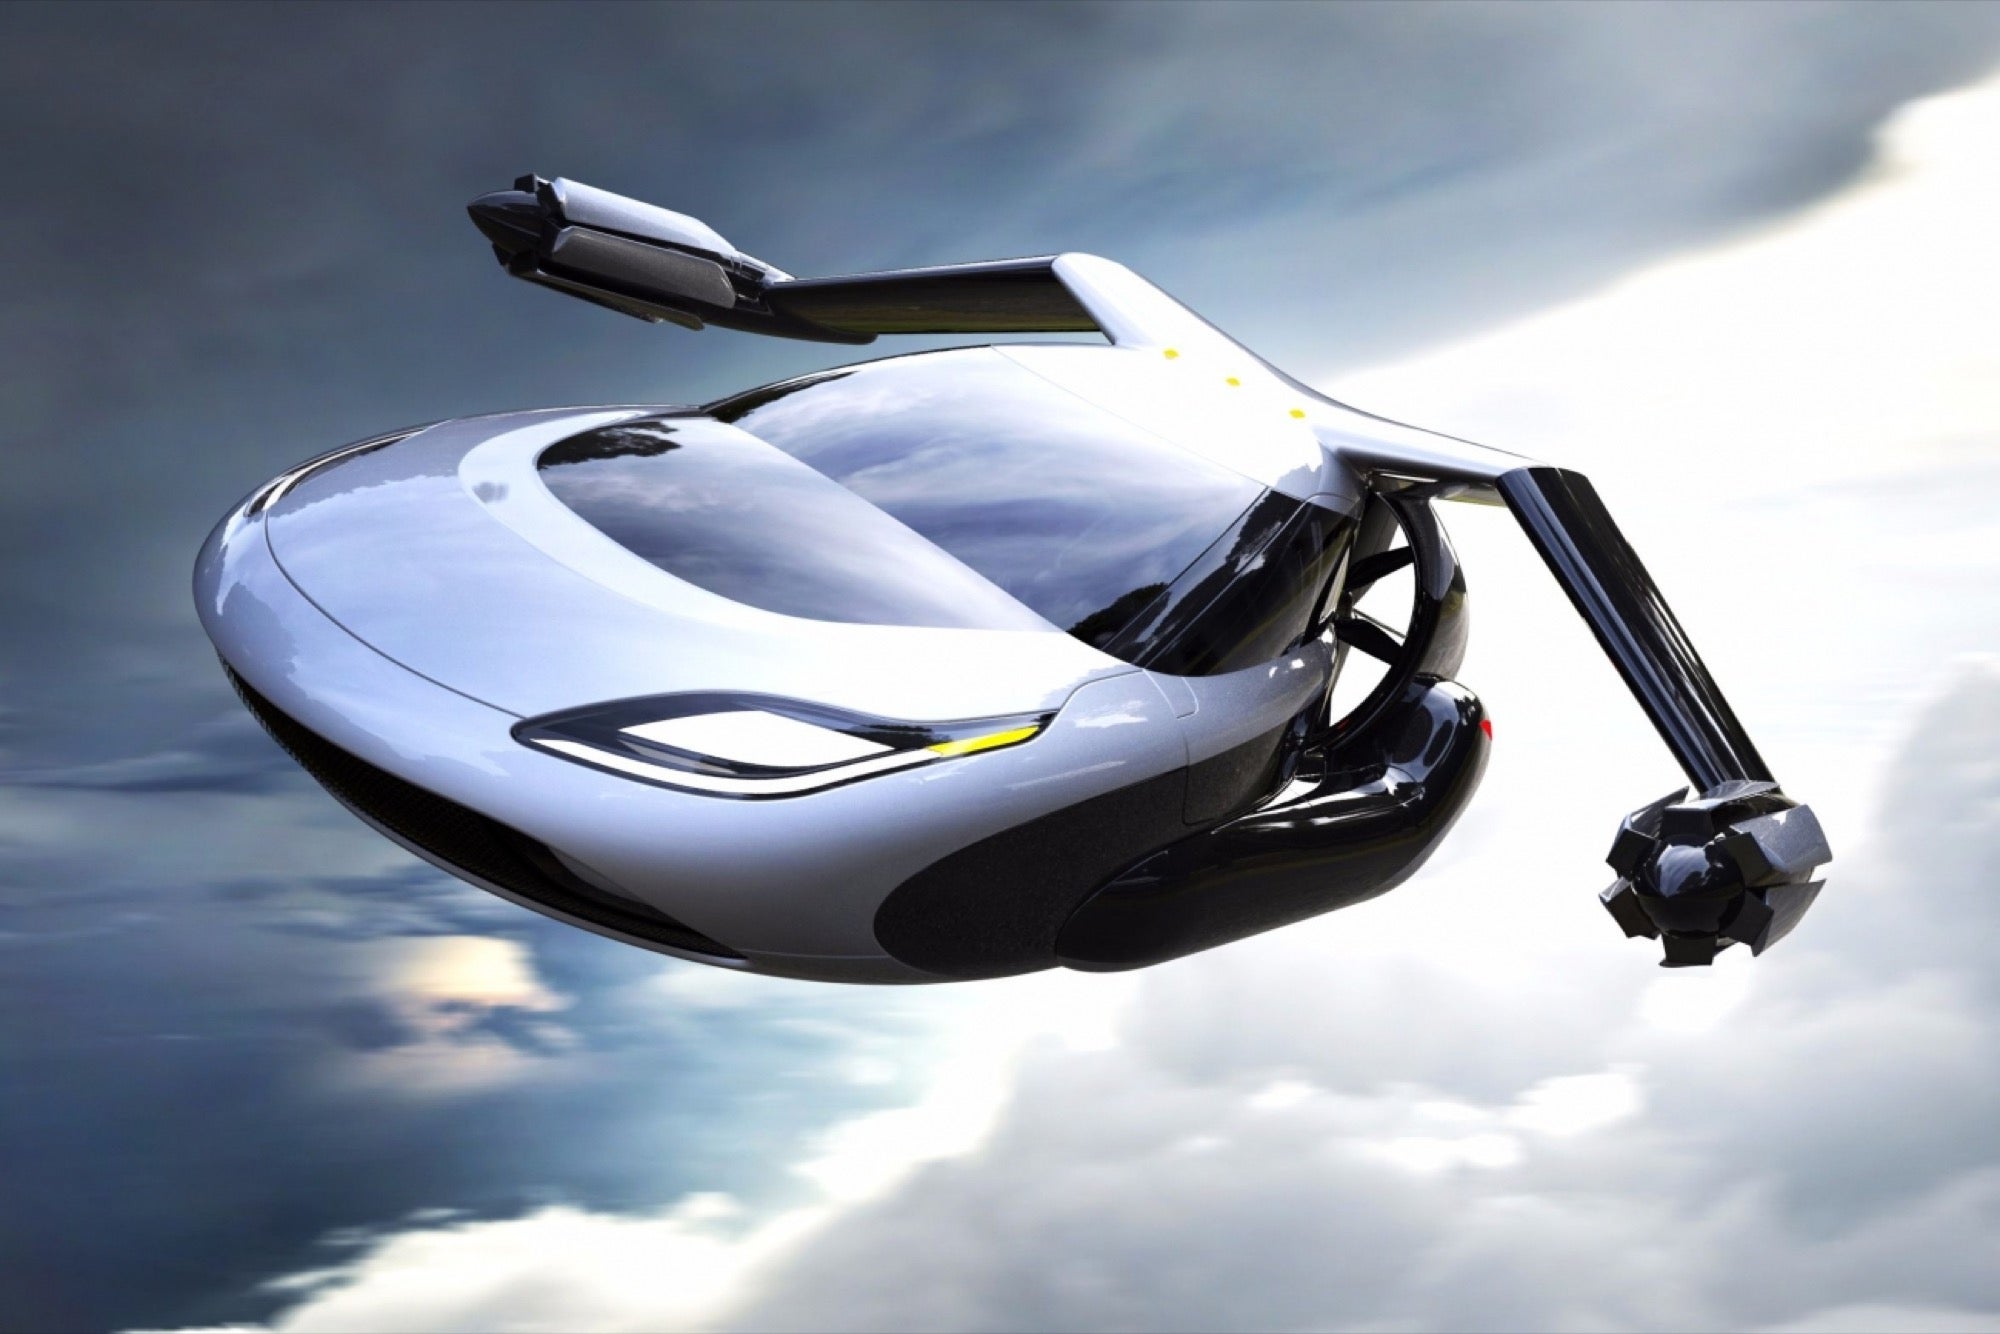 Auto flying cars